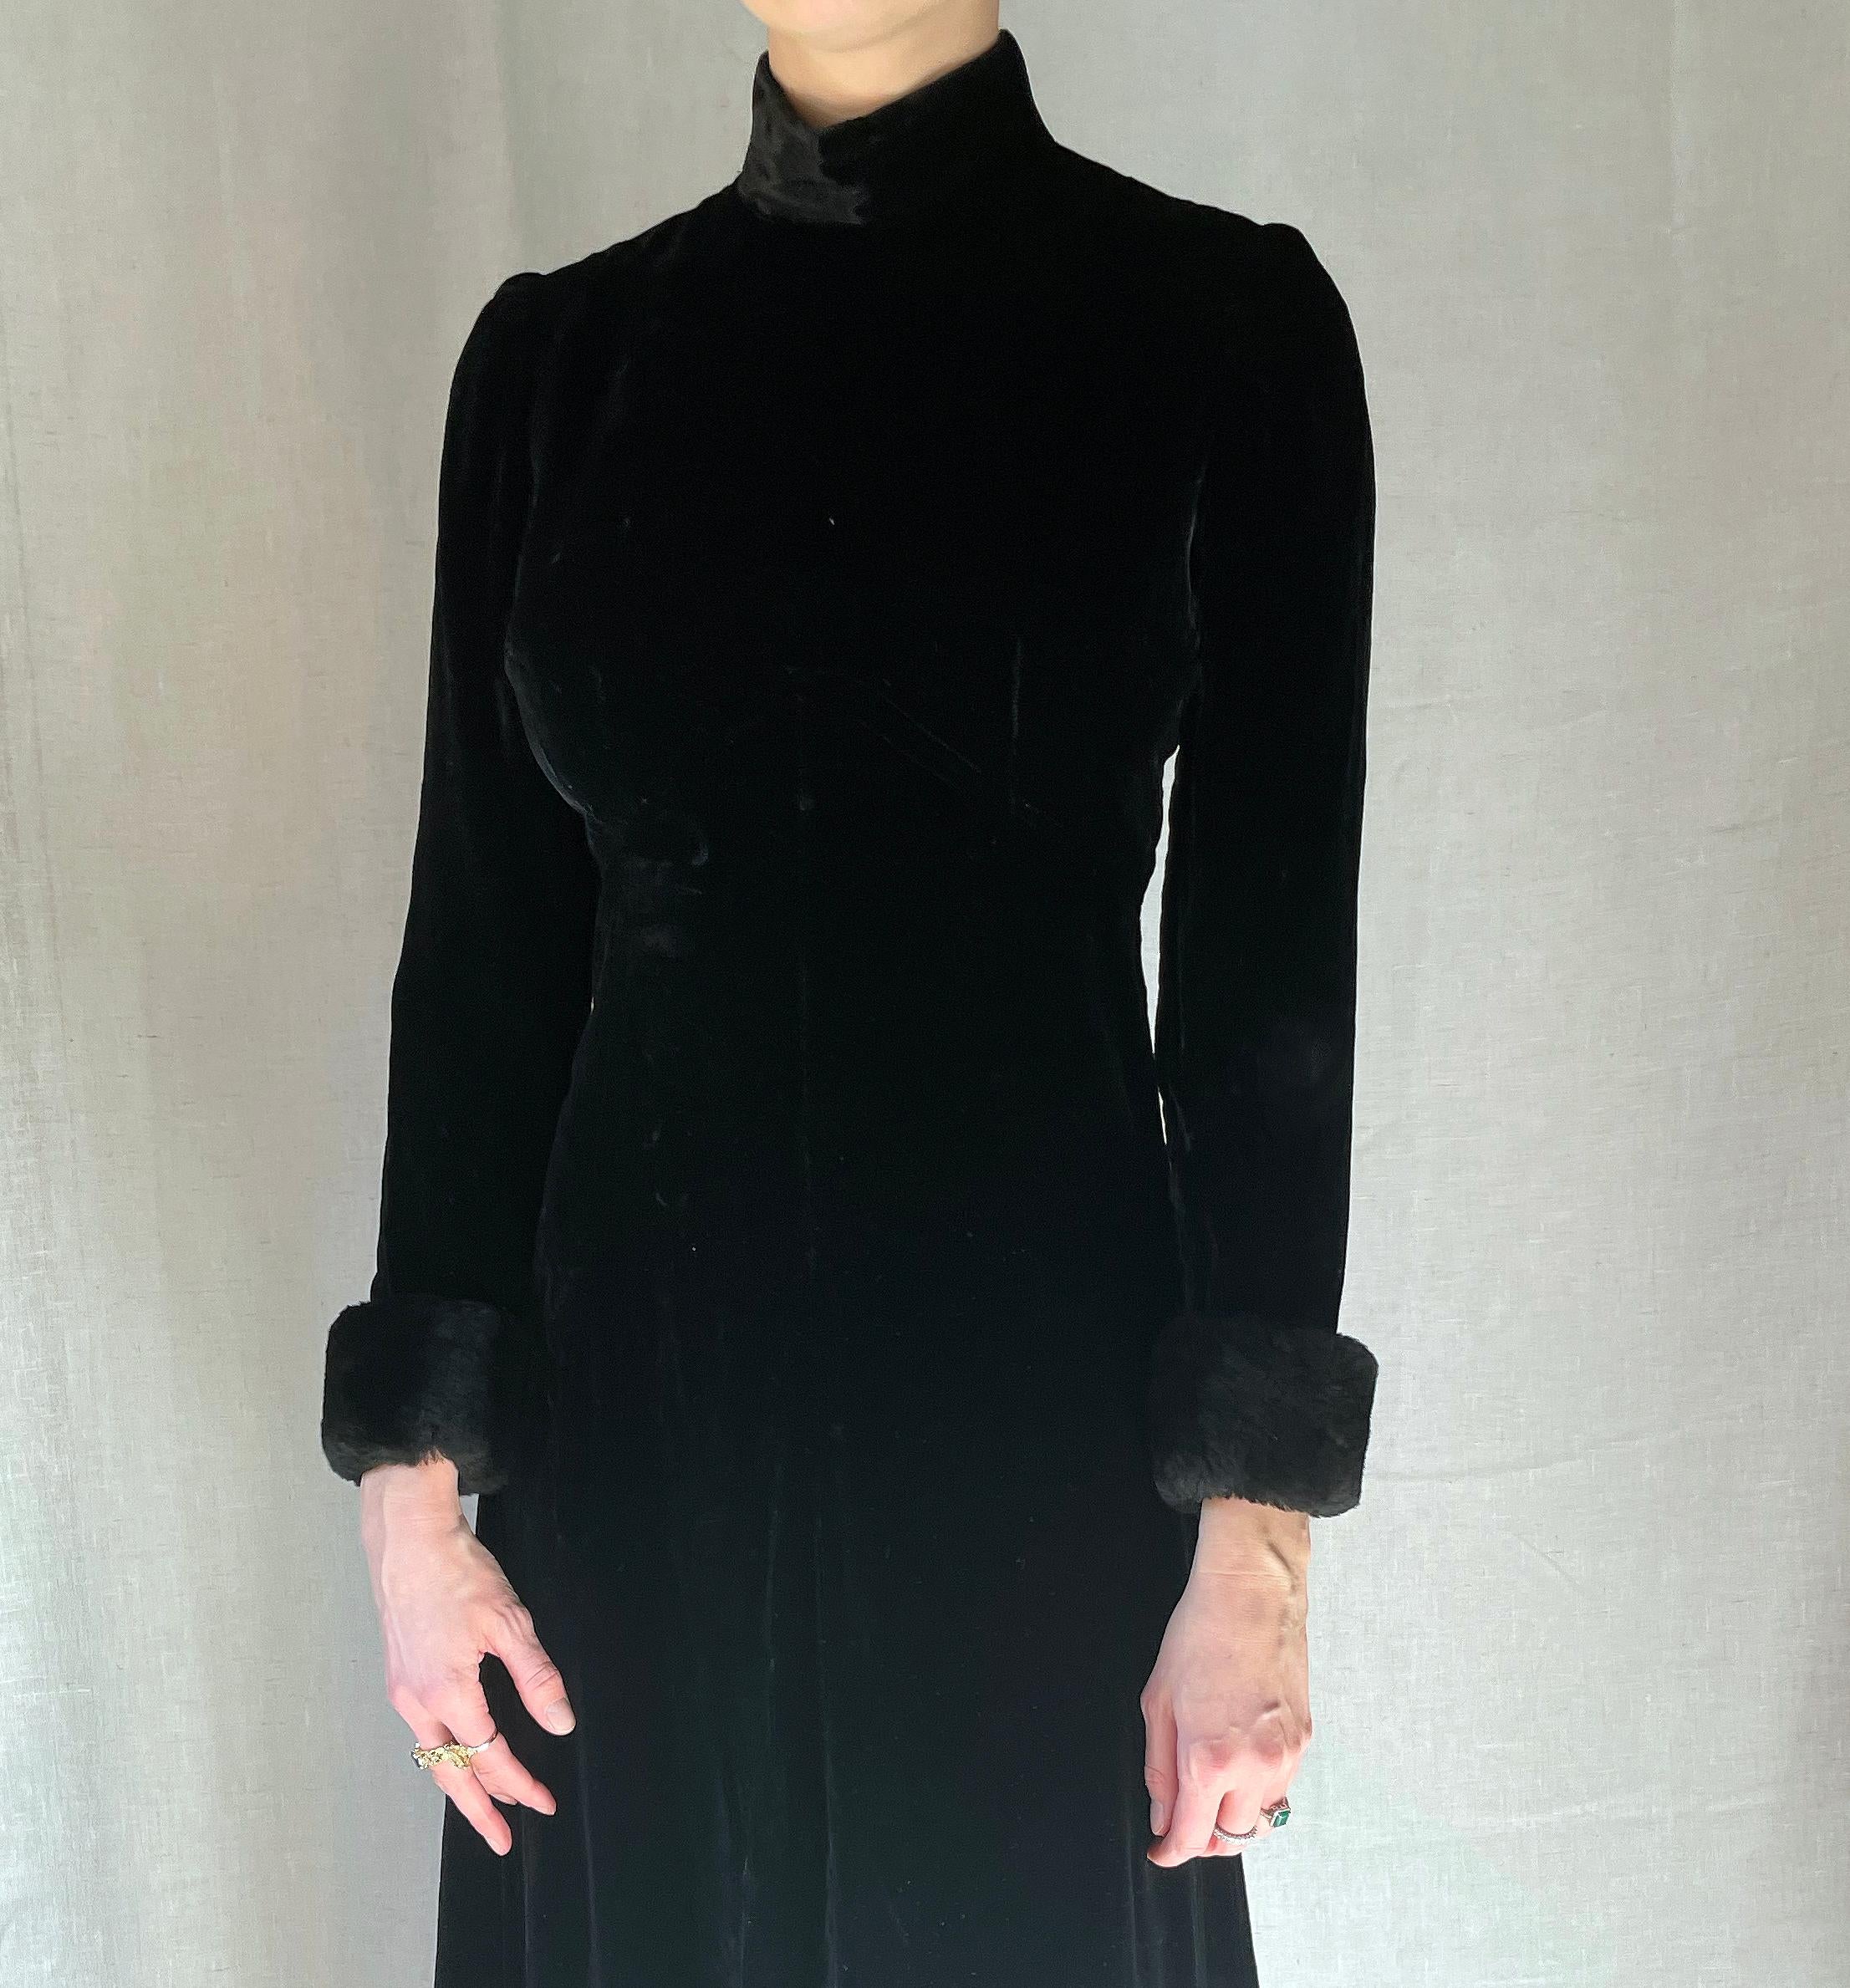 Vintage 1940s Velvet Dress, Size Small:  This is the black velvet dress your wardrobe is missing�— it is just SO good. It was made in the 1940s of black velvet with a gorgeous bias cut; that cut,  combined with the high inverted-V waist, create the